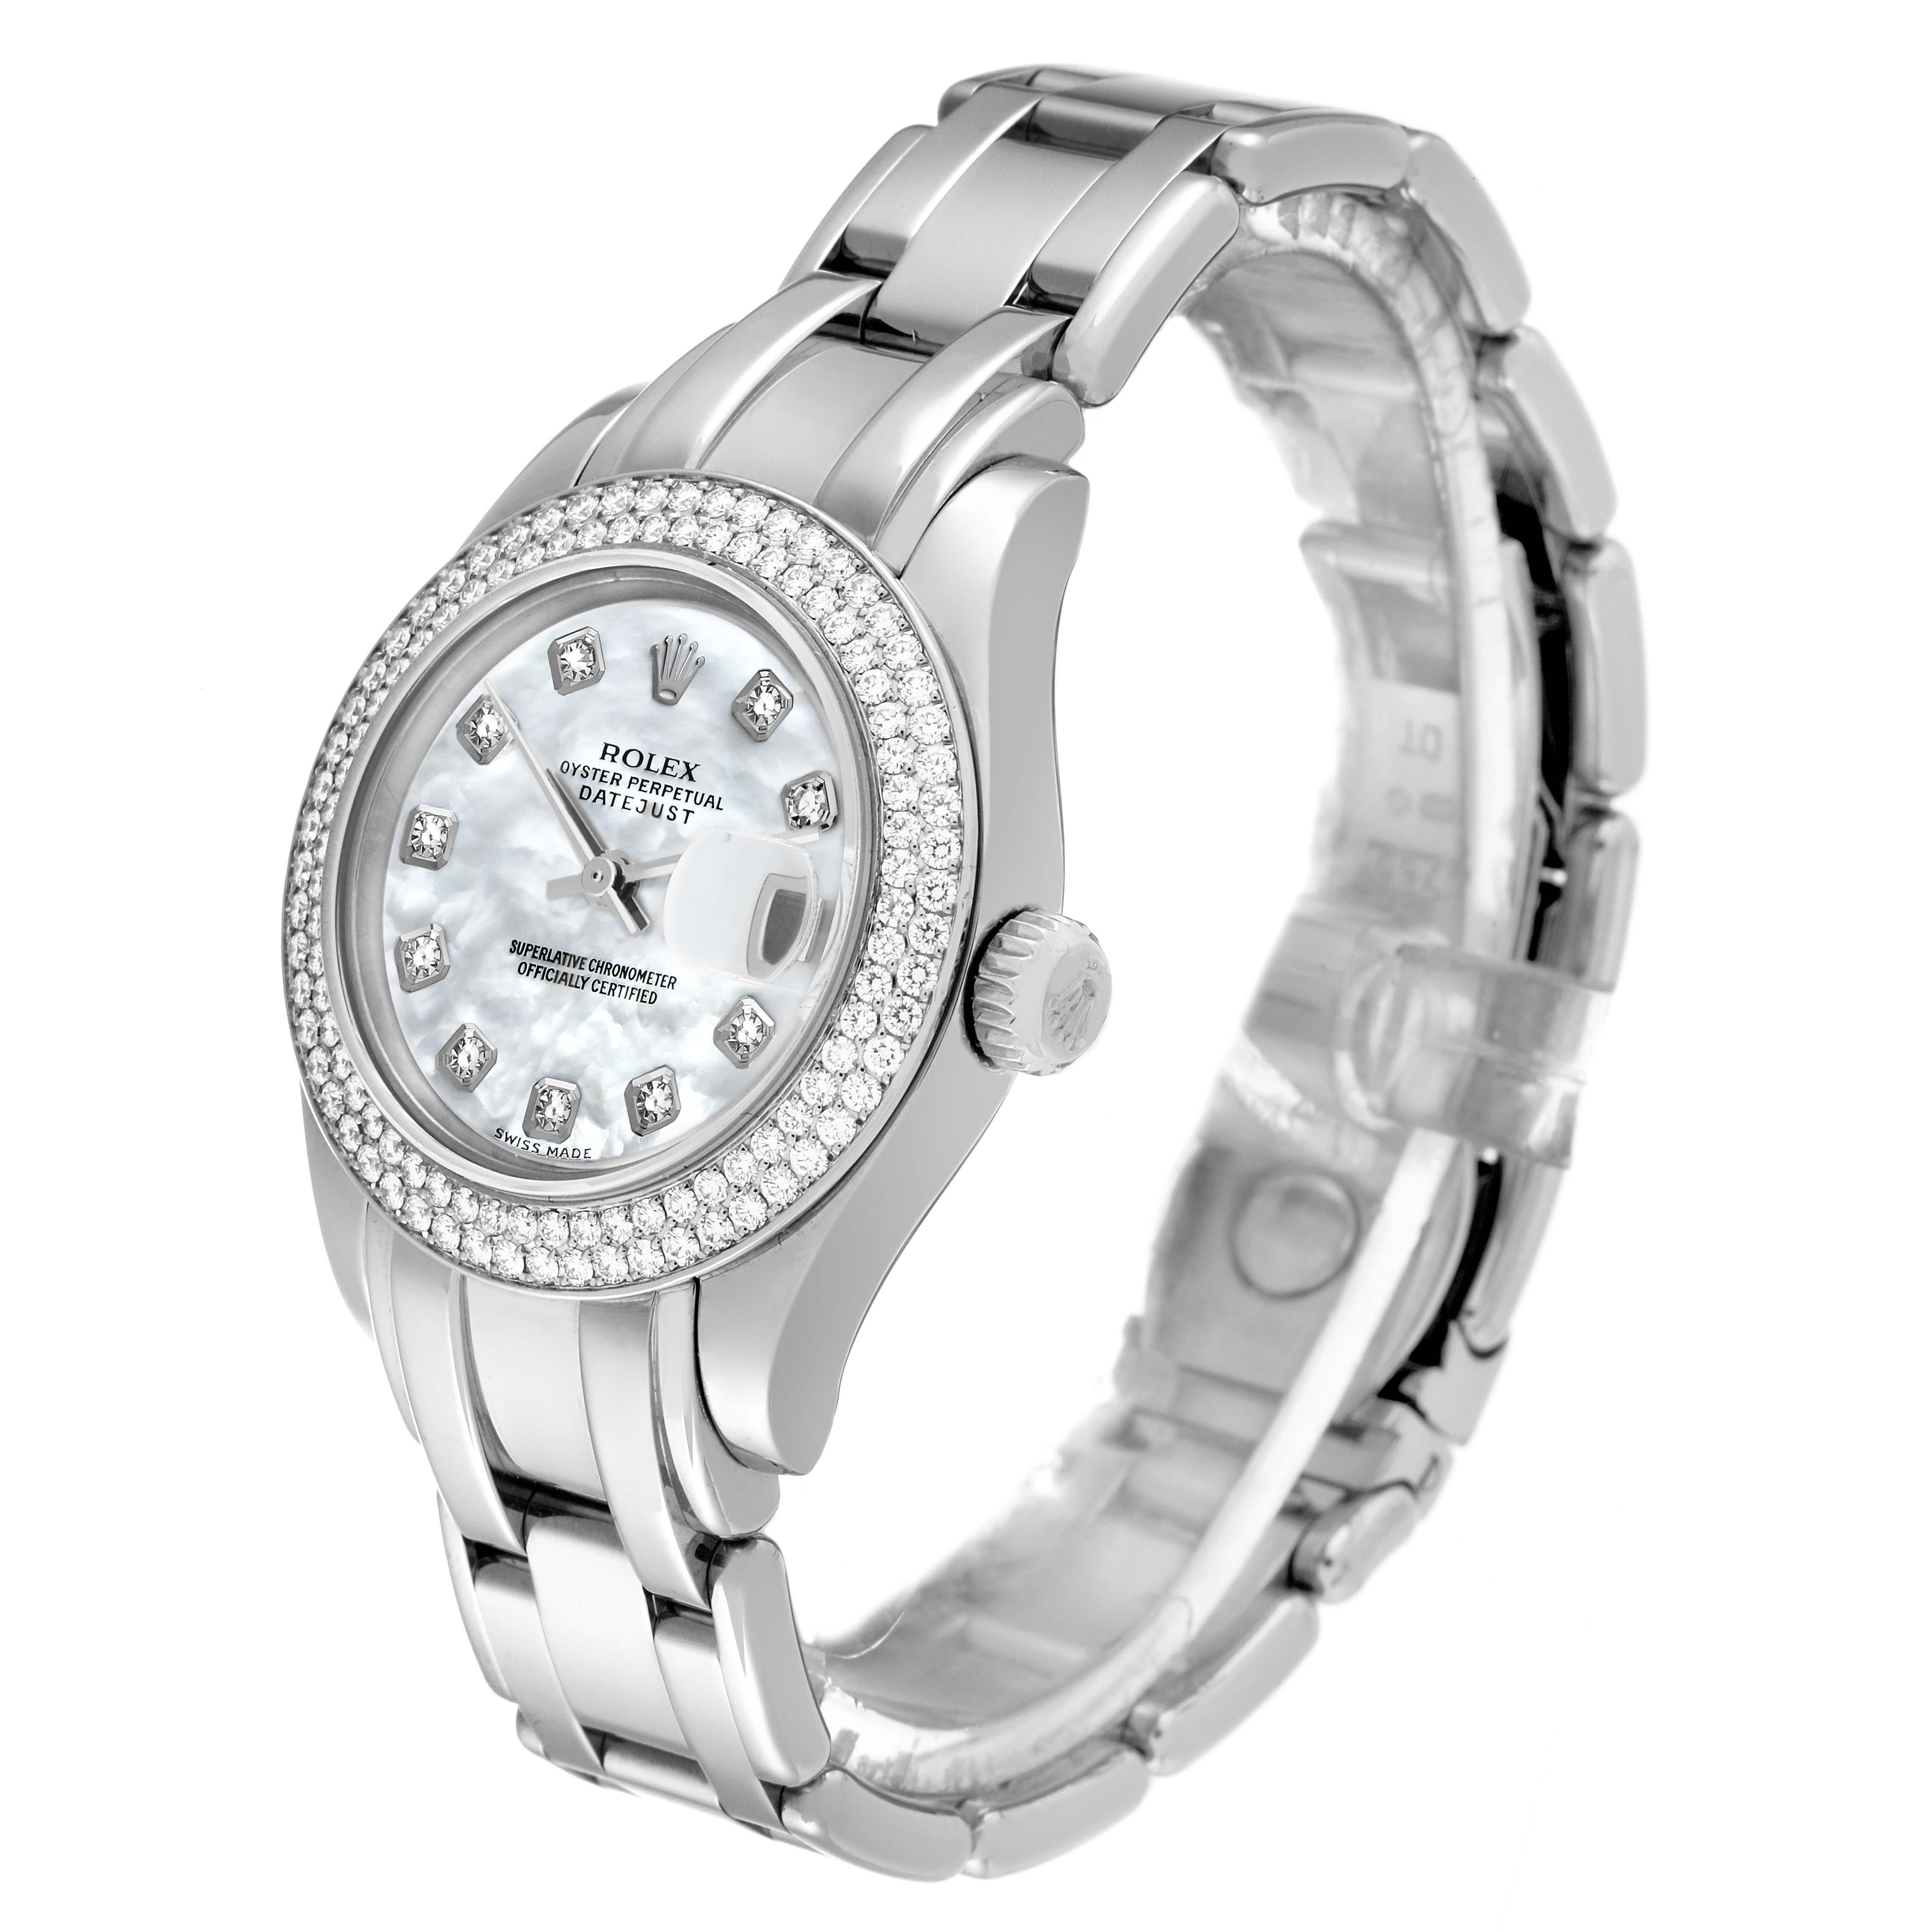 Rolex Pearlmaster White Gold MOP Diamond Ladies Watch 80339 Box Papers 1